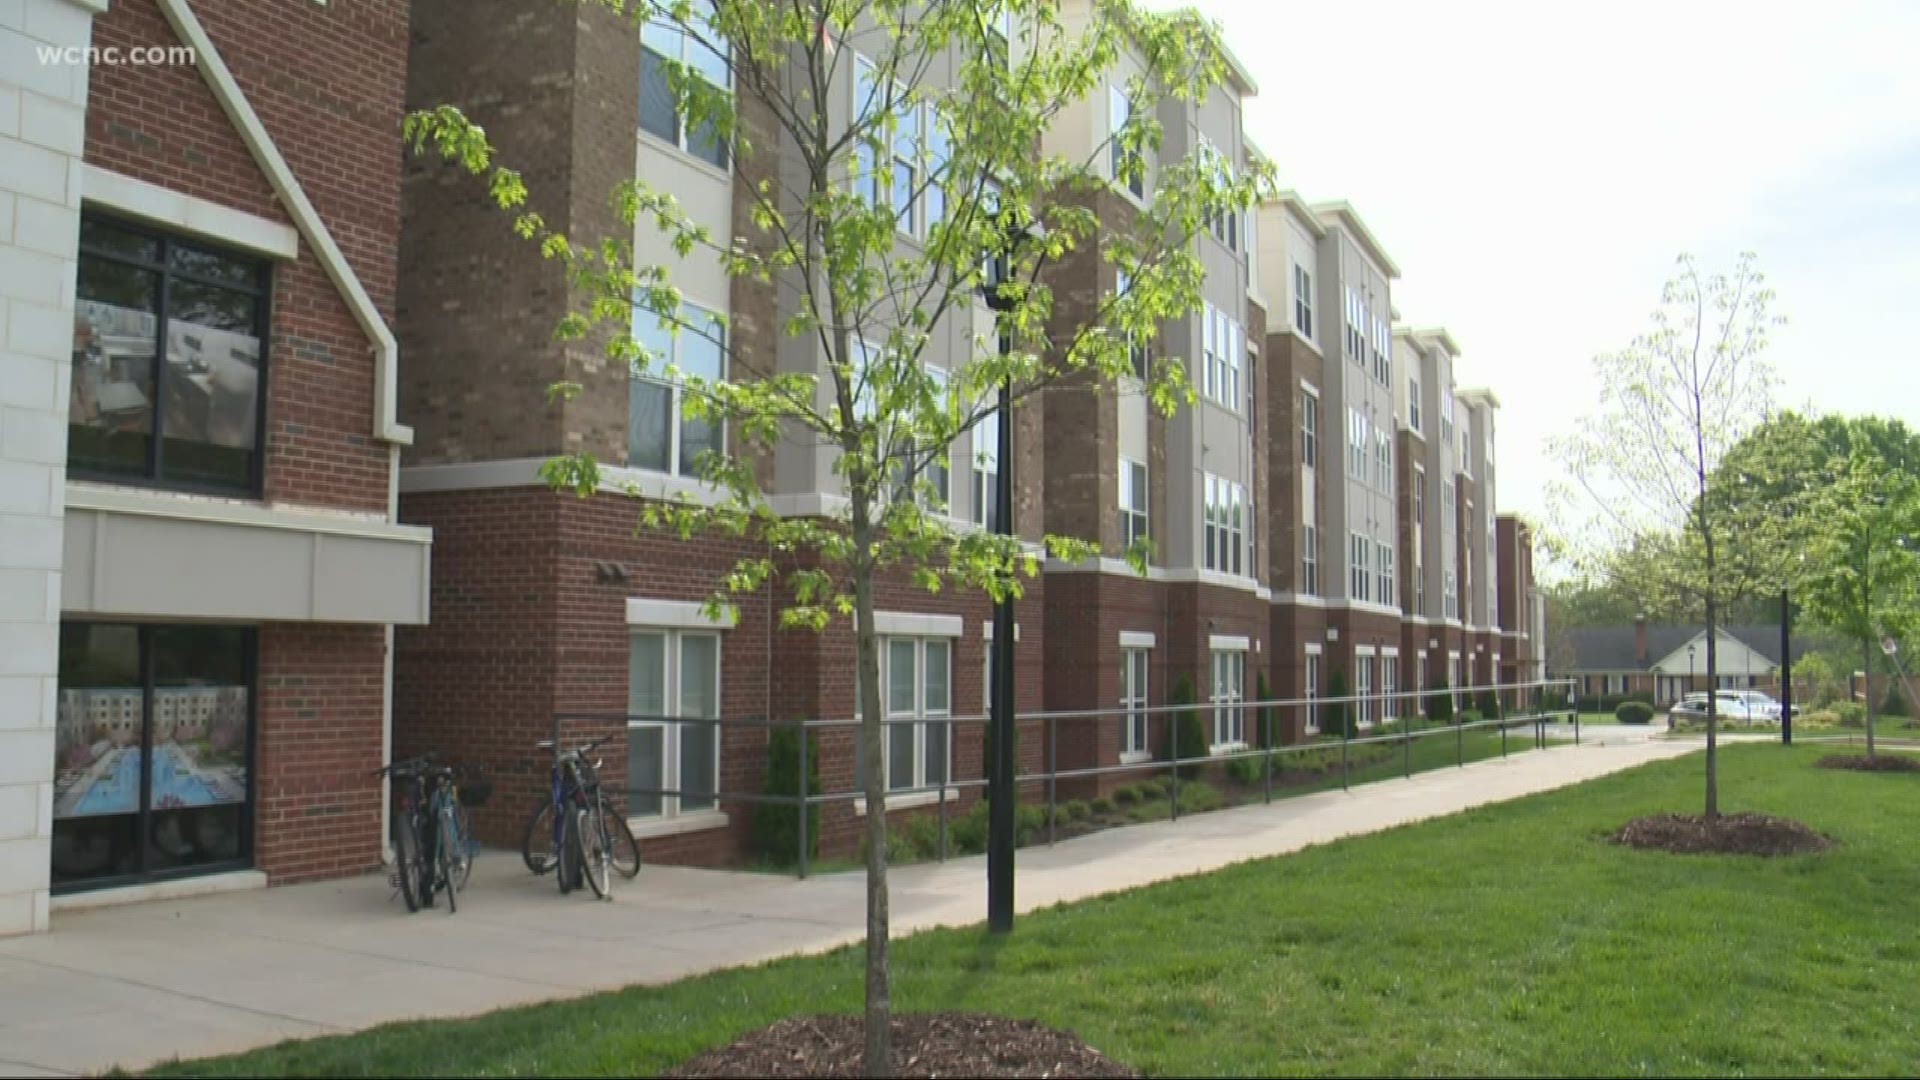 Many college students were planning on living in their off-campus apartments until summer, but COVID-19 concerns have caused them to move home to their parents.